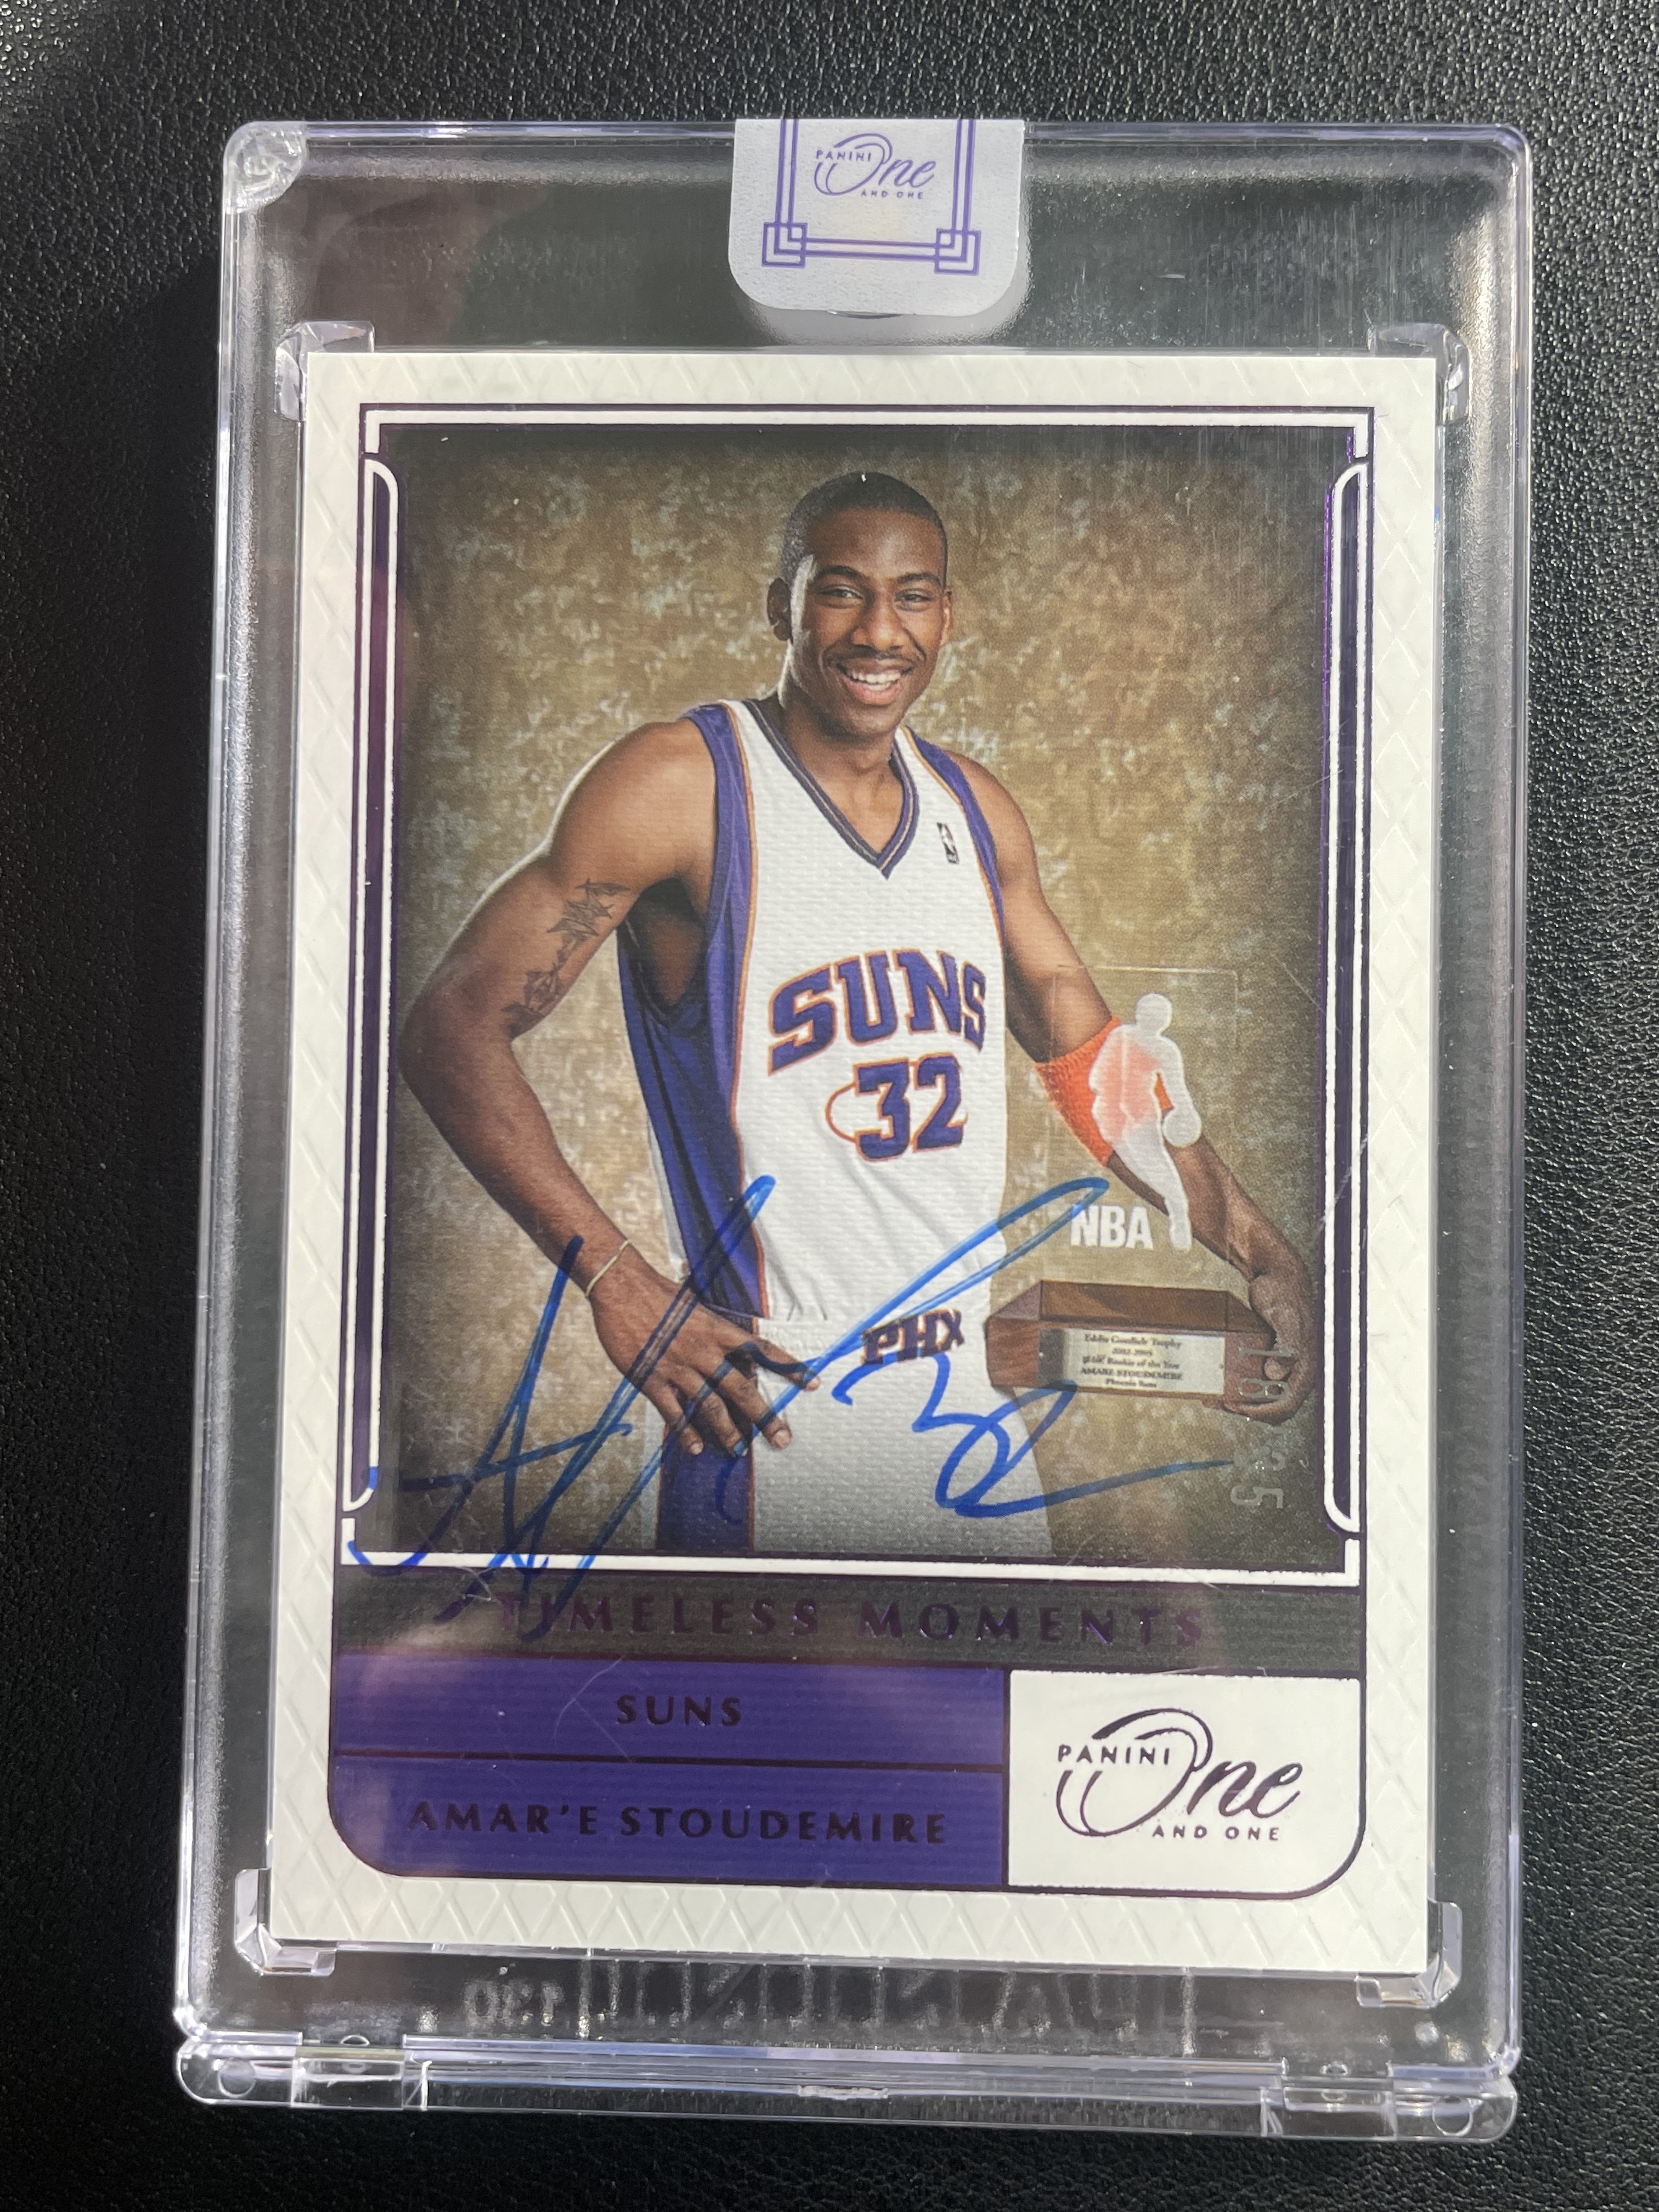 2021-22 Panini One and One Amare Stoudemire 太阳 小斯 斯塔德迈尔 /35编 紫平行 签字卡签 Timeless Moments时刻原封砖Hicard73涛